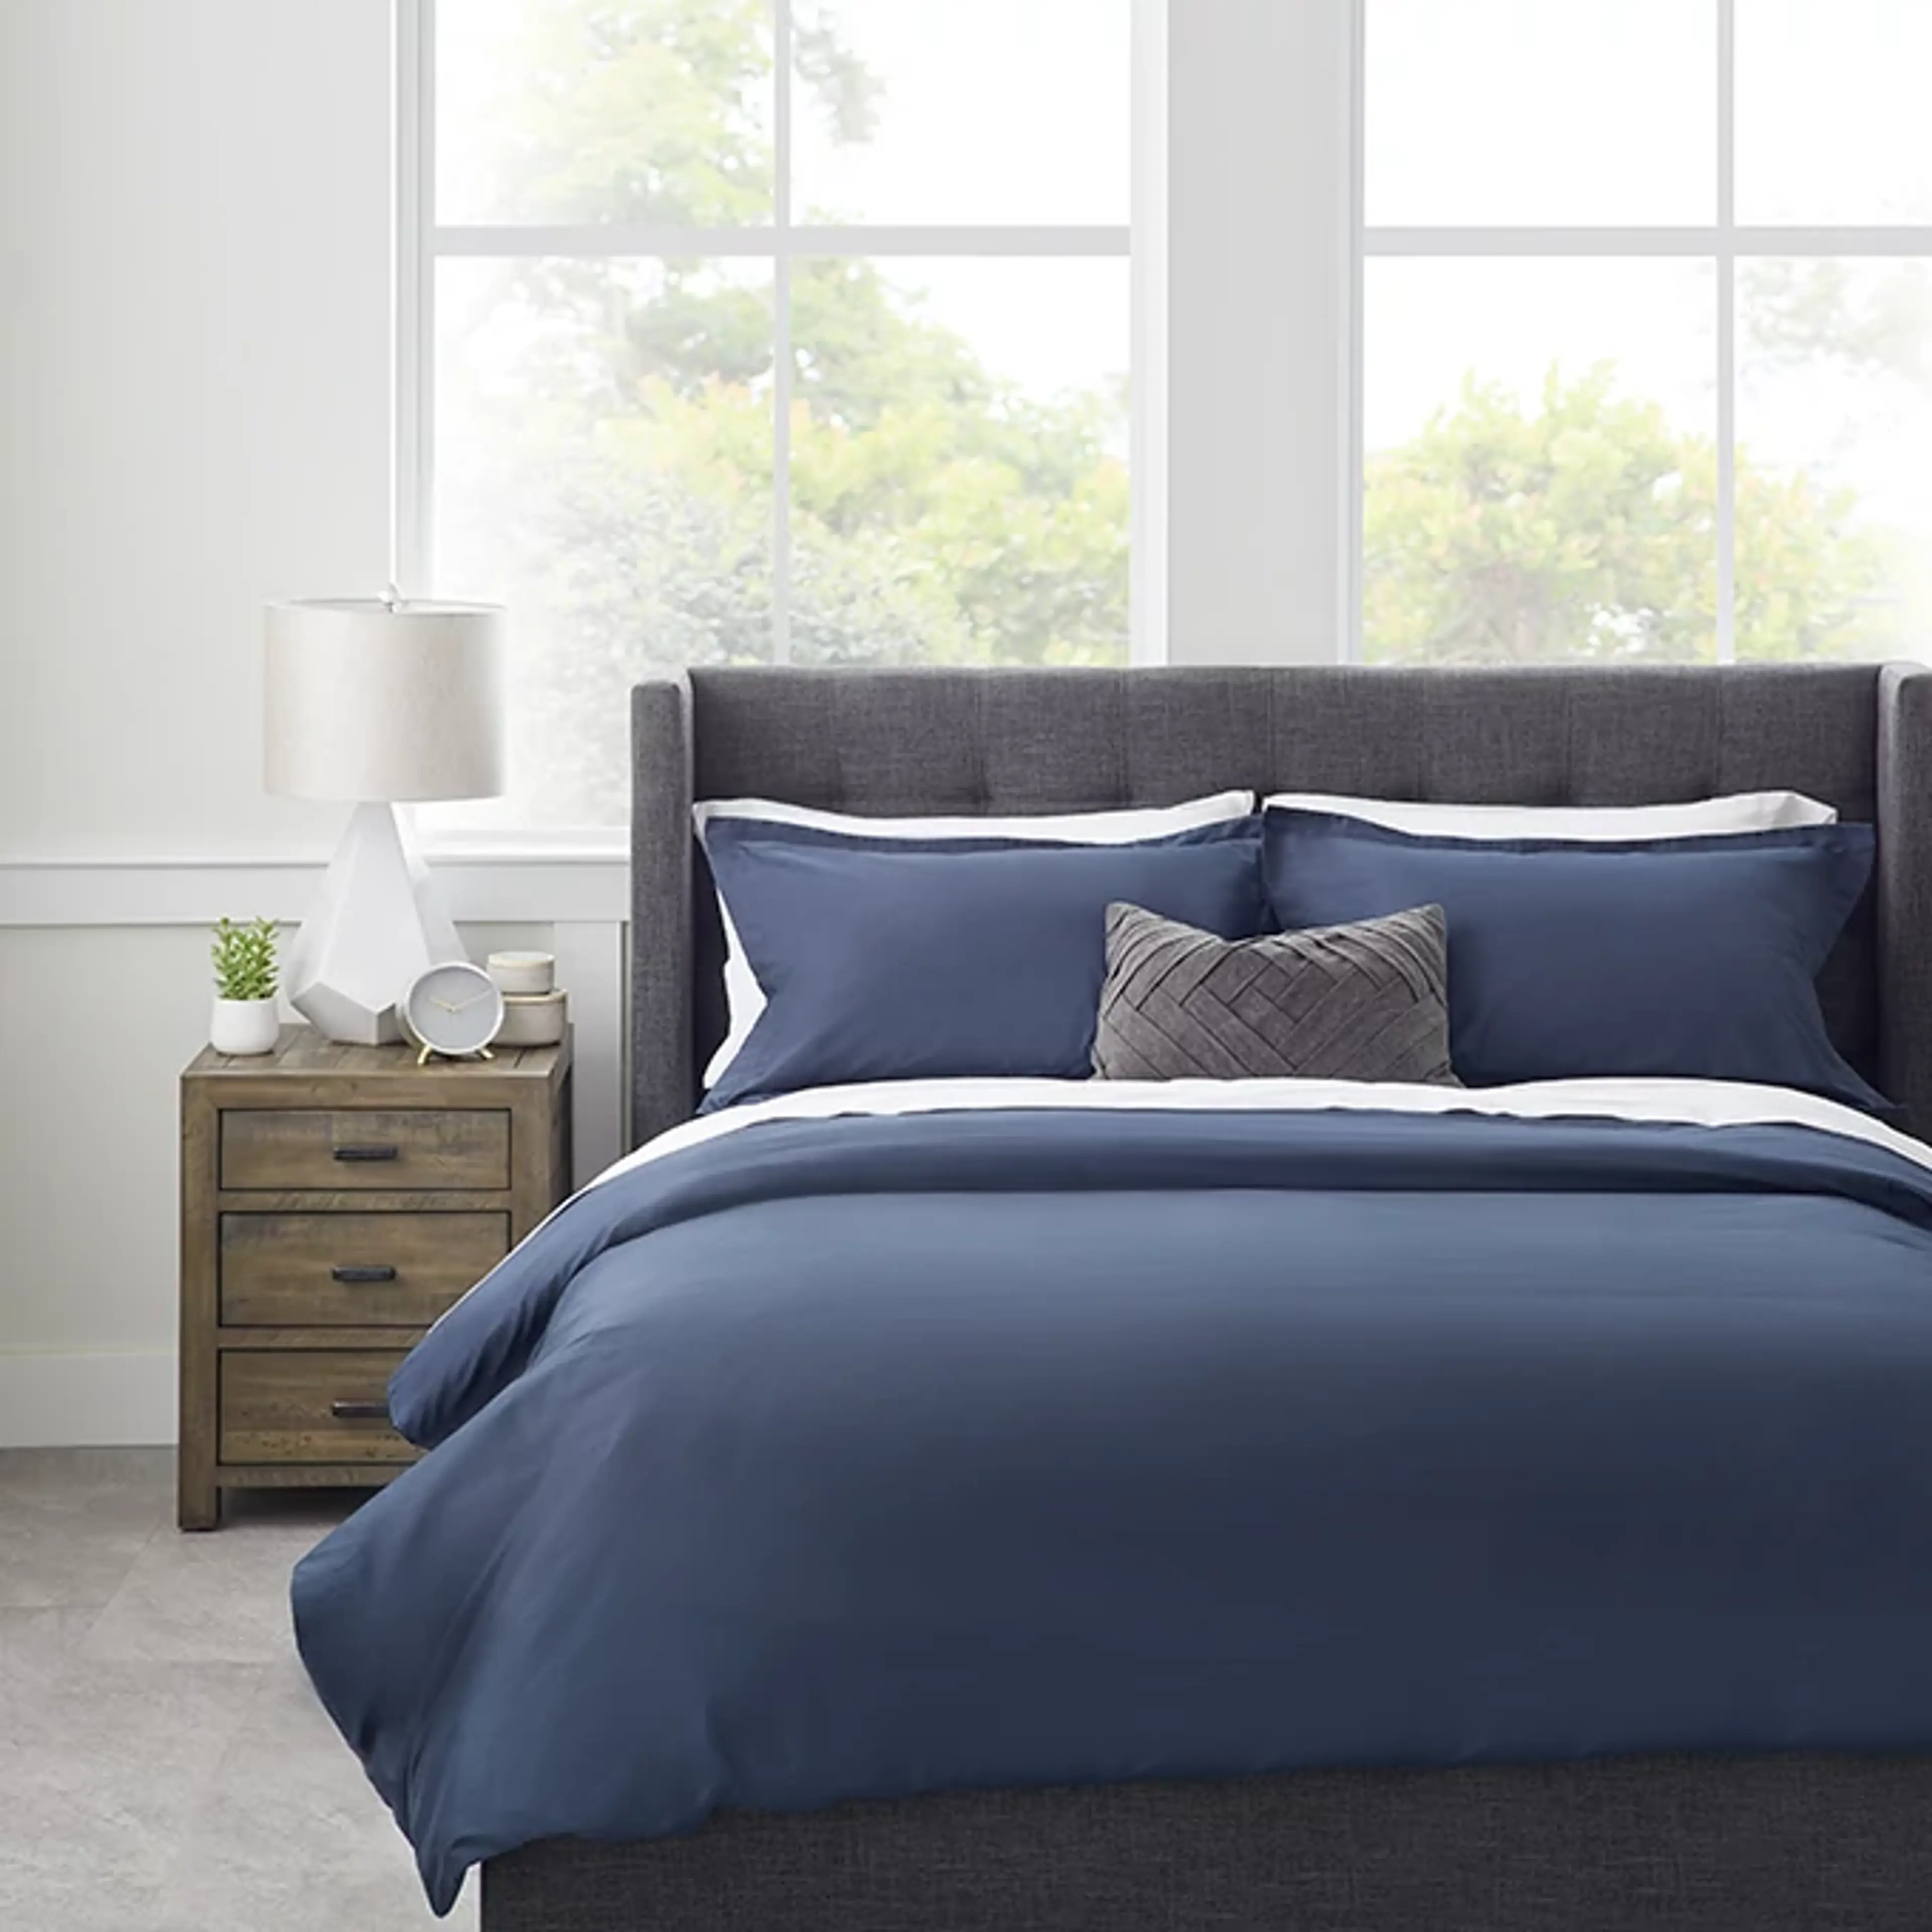 Rest and Renew brand: Egyptian Cotton Bedding 